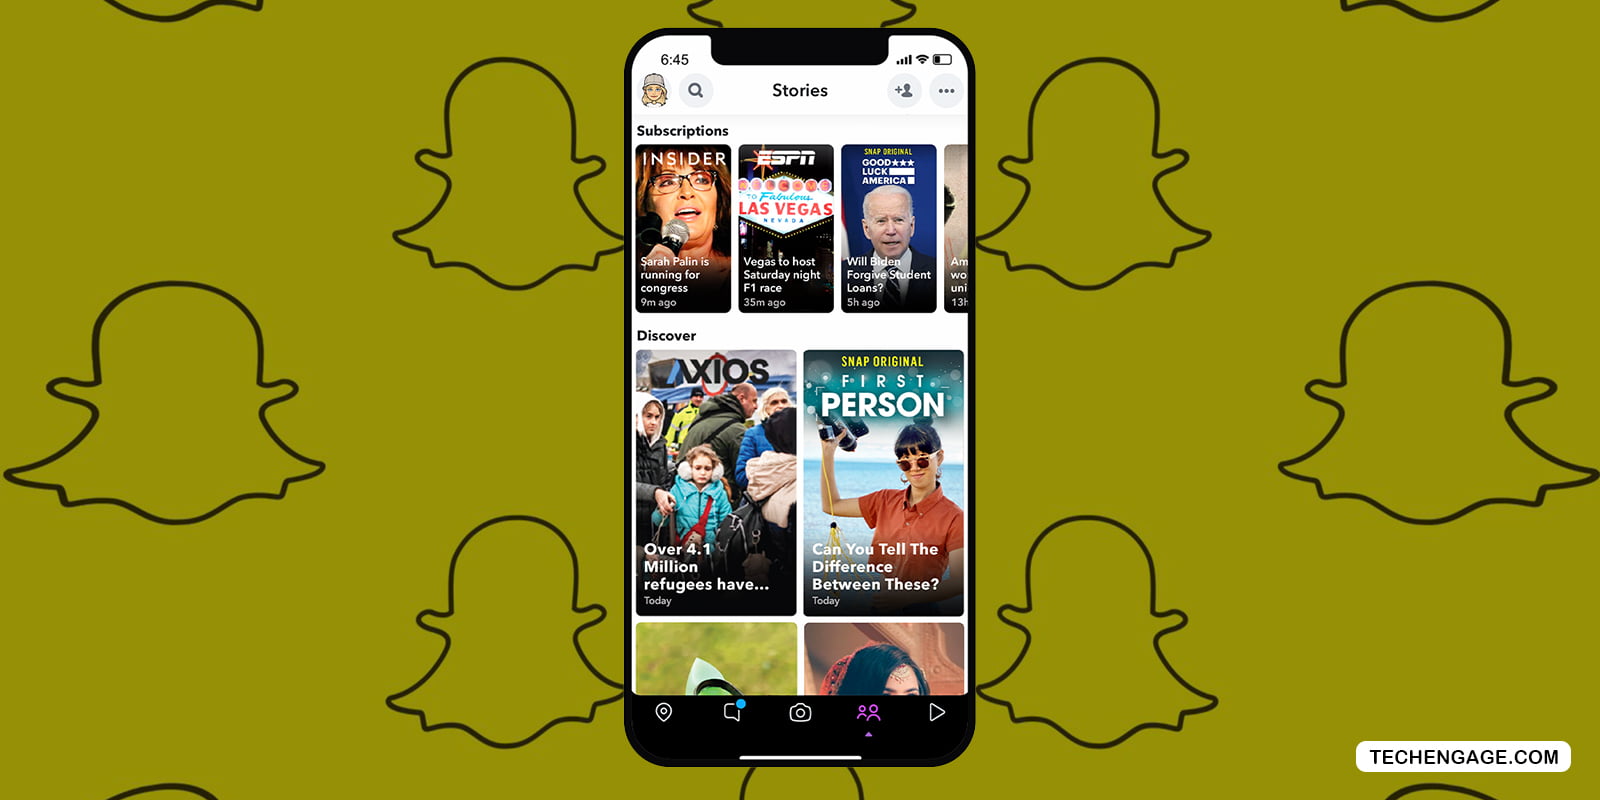 Snapchat Introduces Dynamic Stories To Allow Publishers To Create Posts